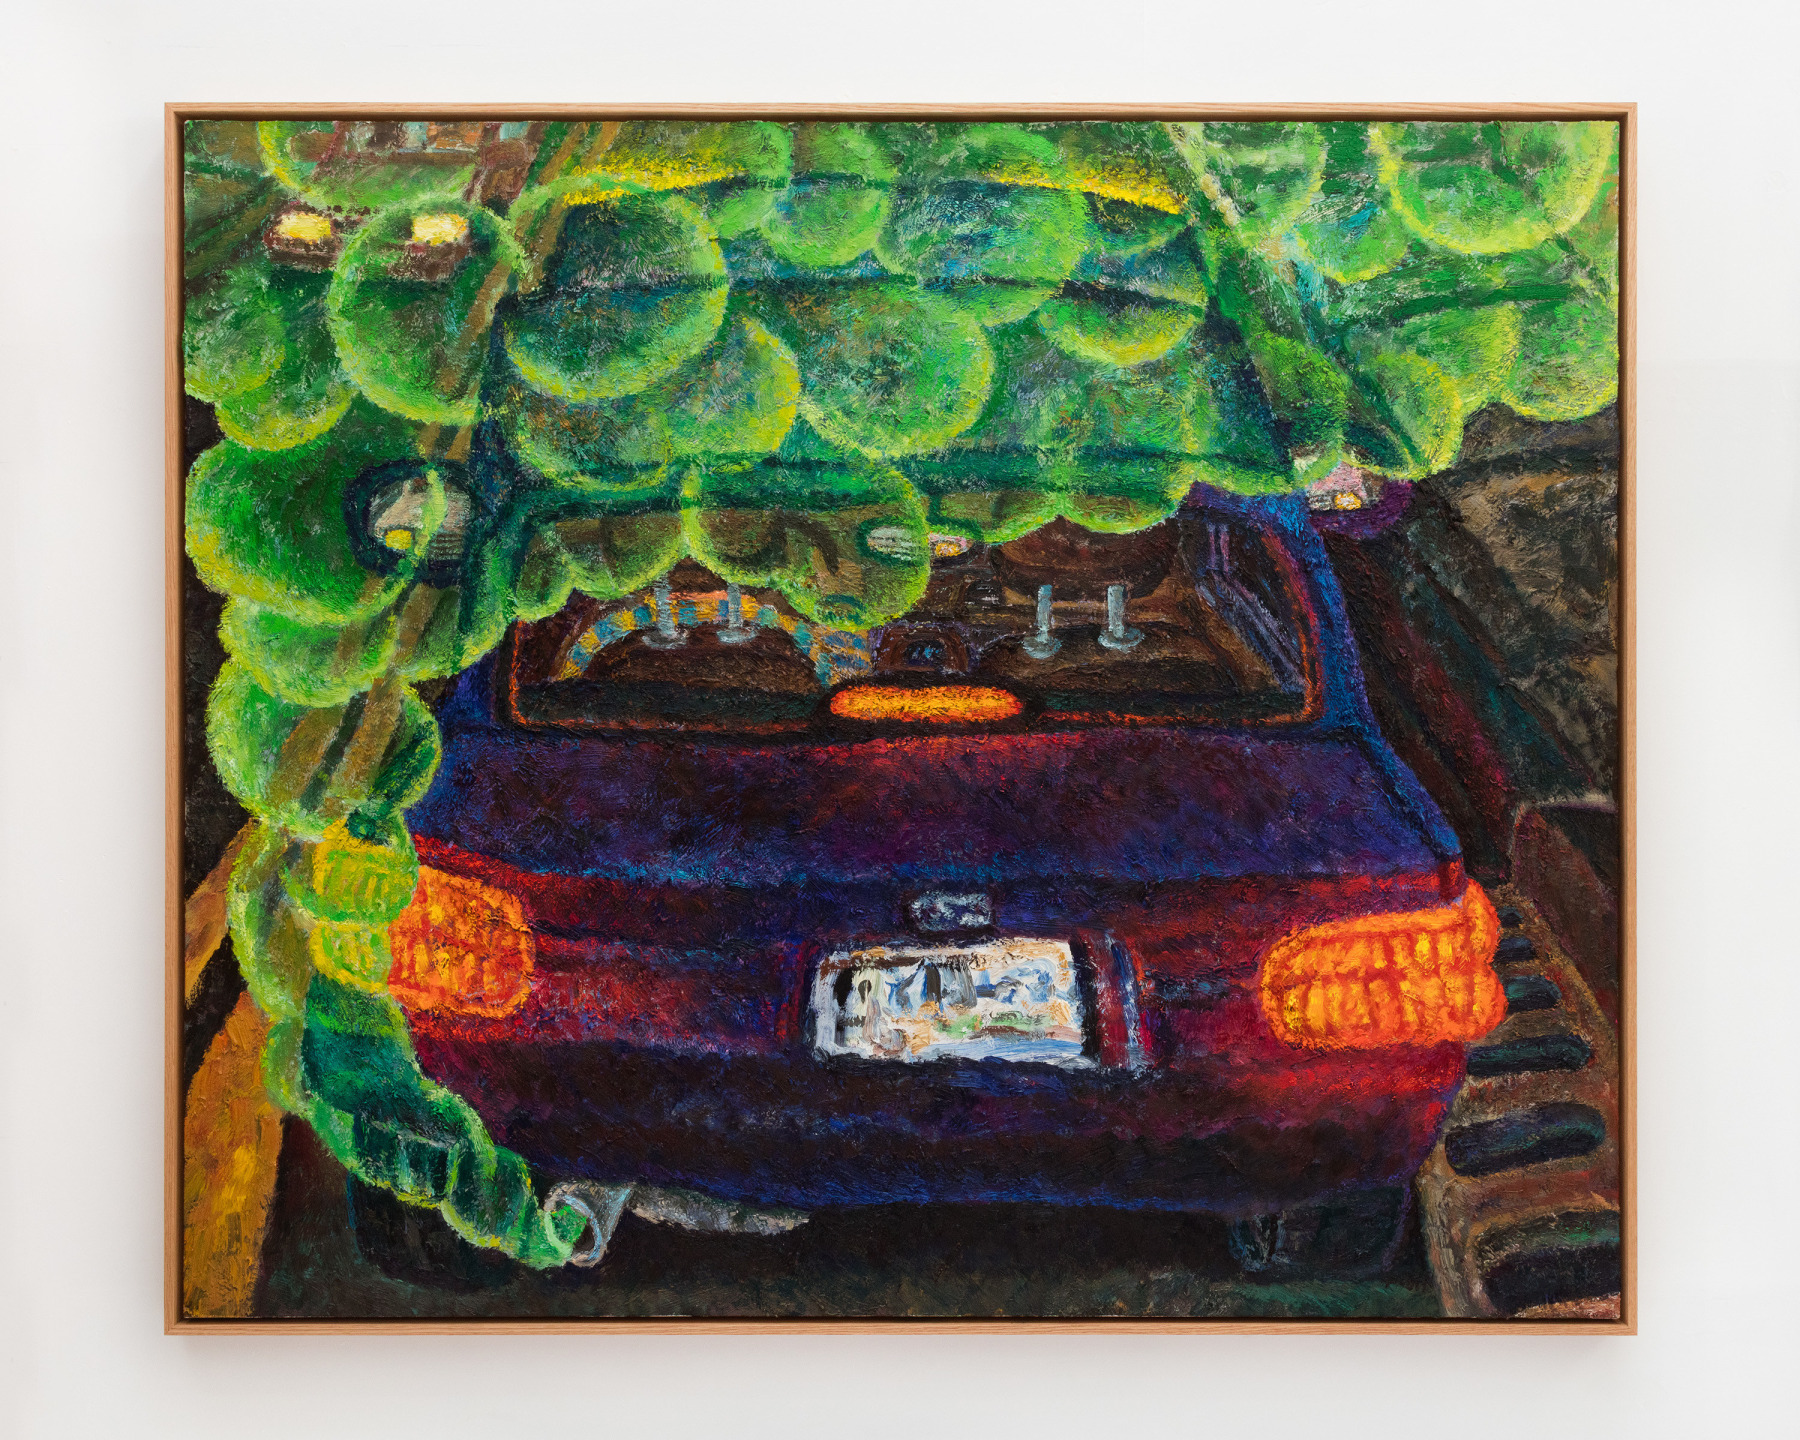 Keegan Monaghan, Blue Car, 2020. Oil on canvas in oak frame, 59 7/8 x 72 inches (152.1 x 182.9 cm.) Courtesy of the artist and Parker Gallery, Los Angeles